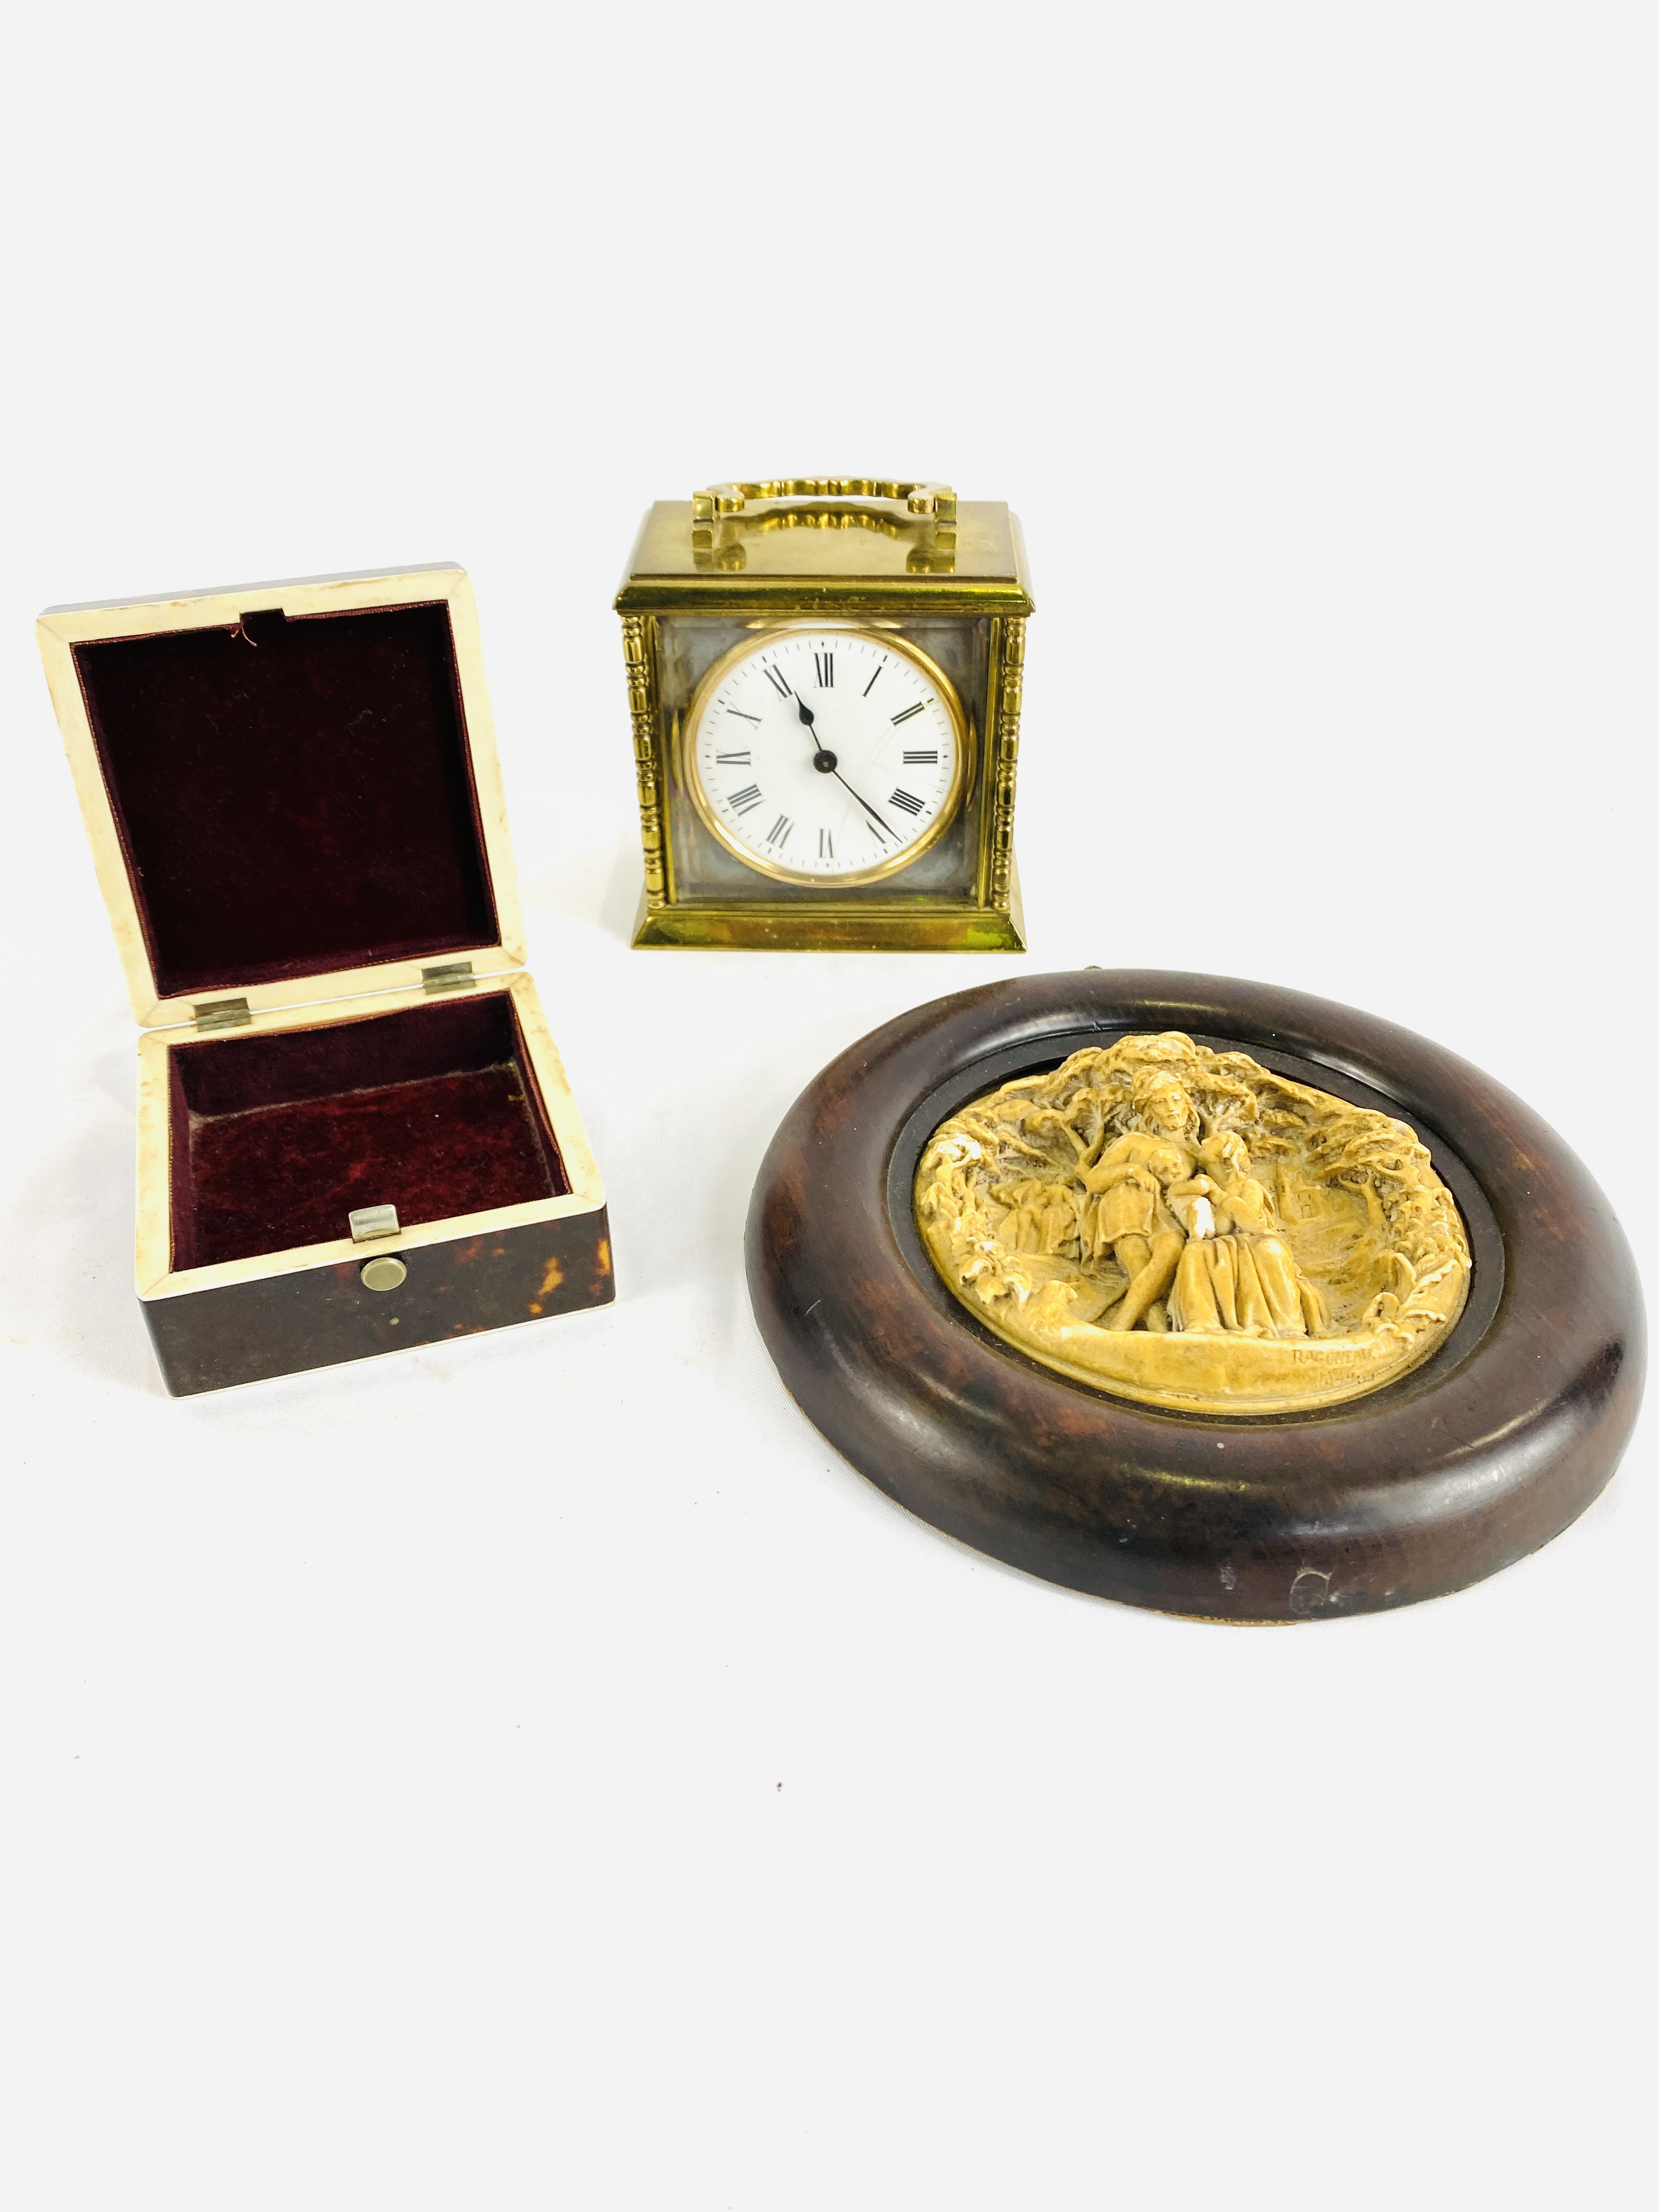 Brass carriage clock and other items